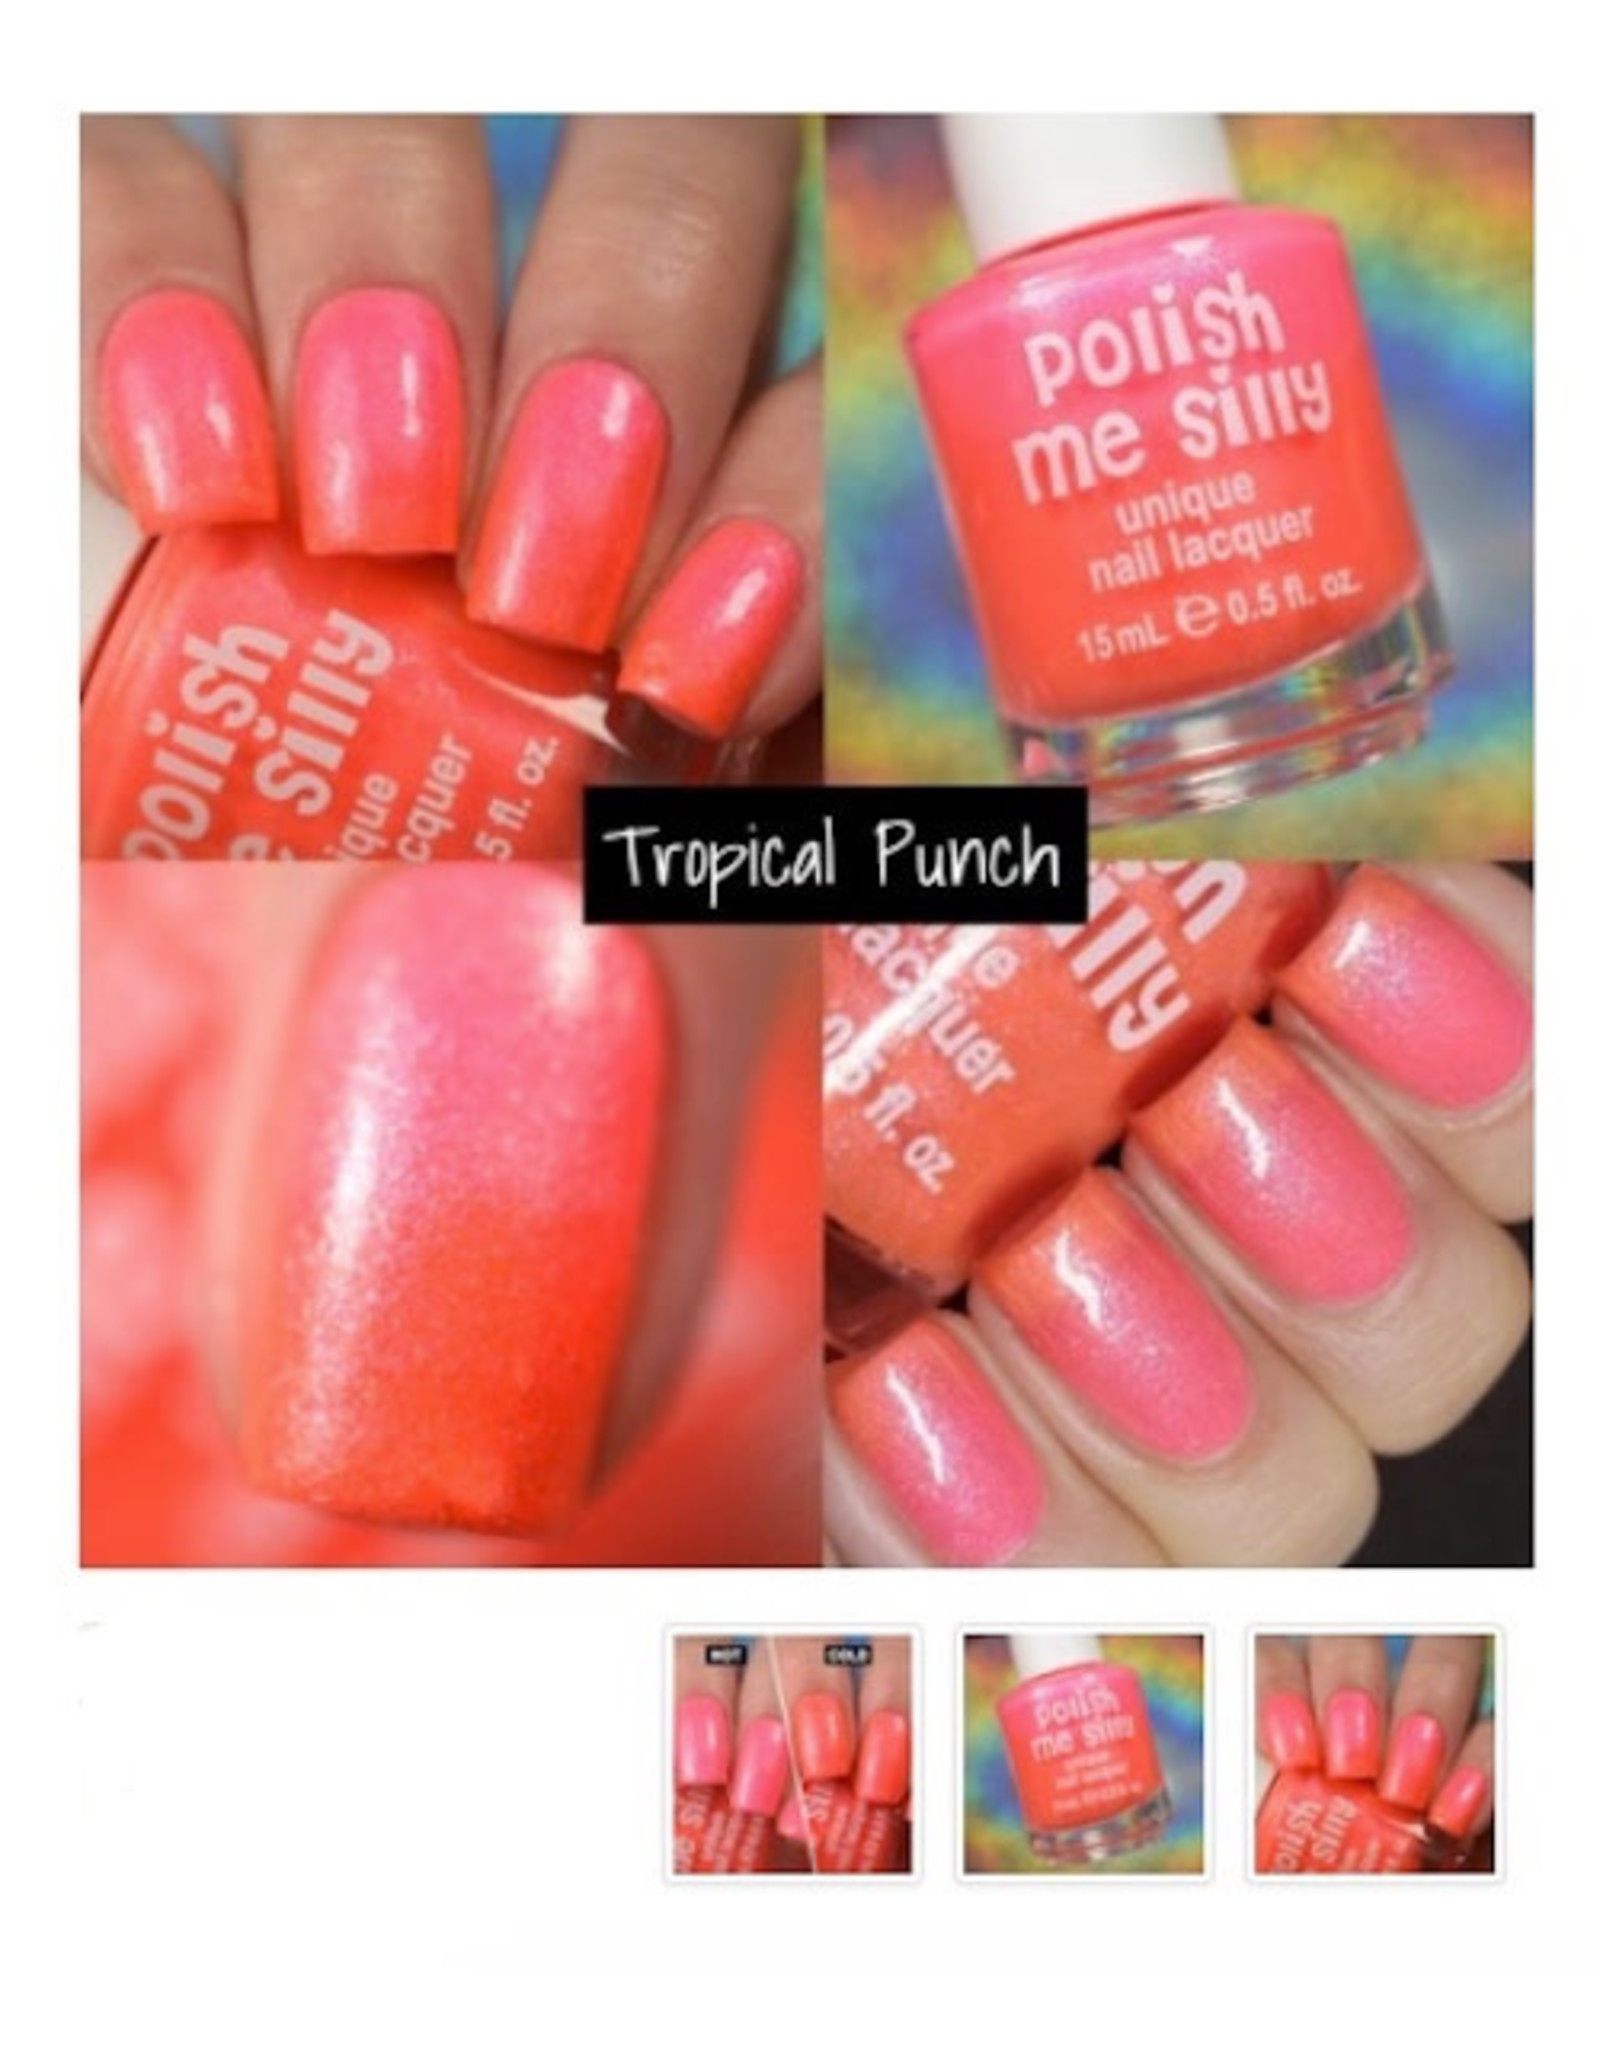 Thermal Color Changing Polish Me Silly